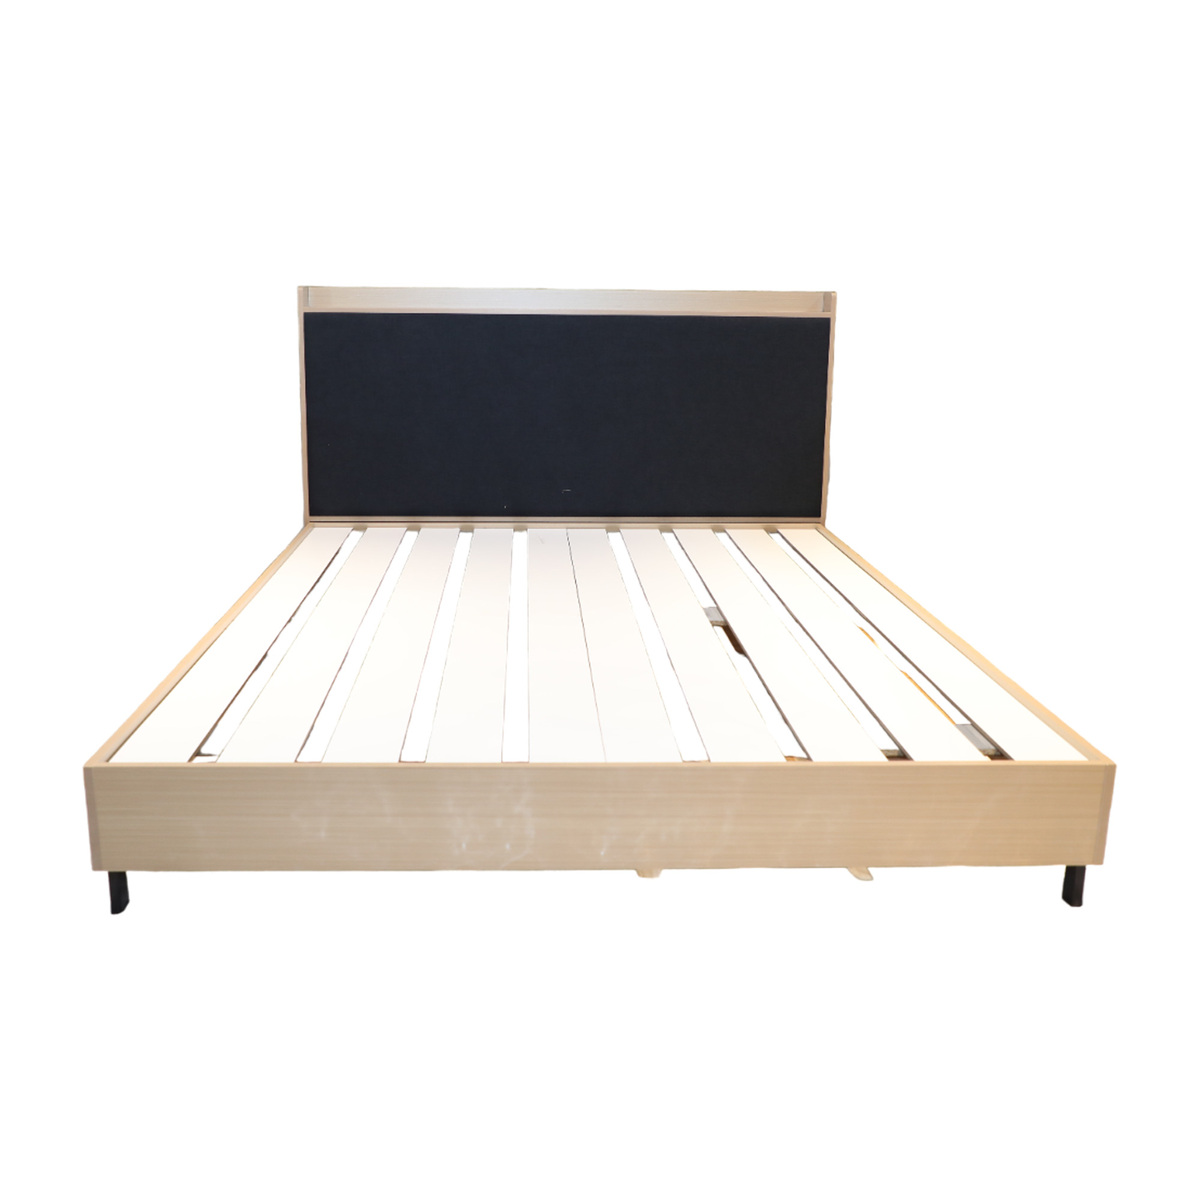 Maple Leaf Bed Cot